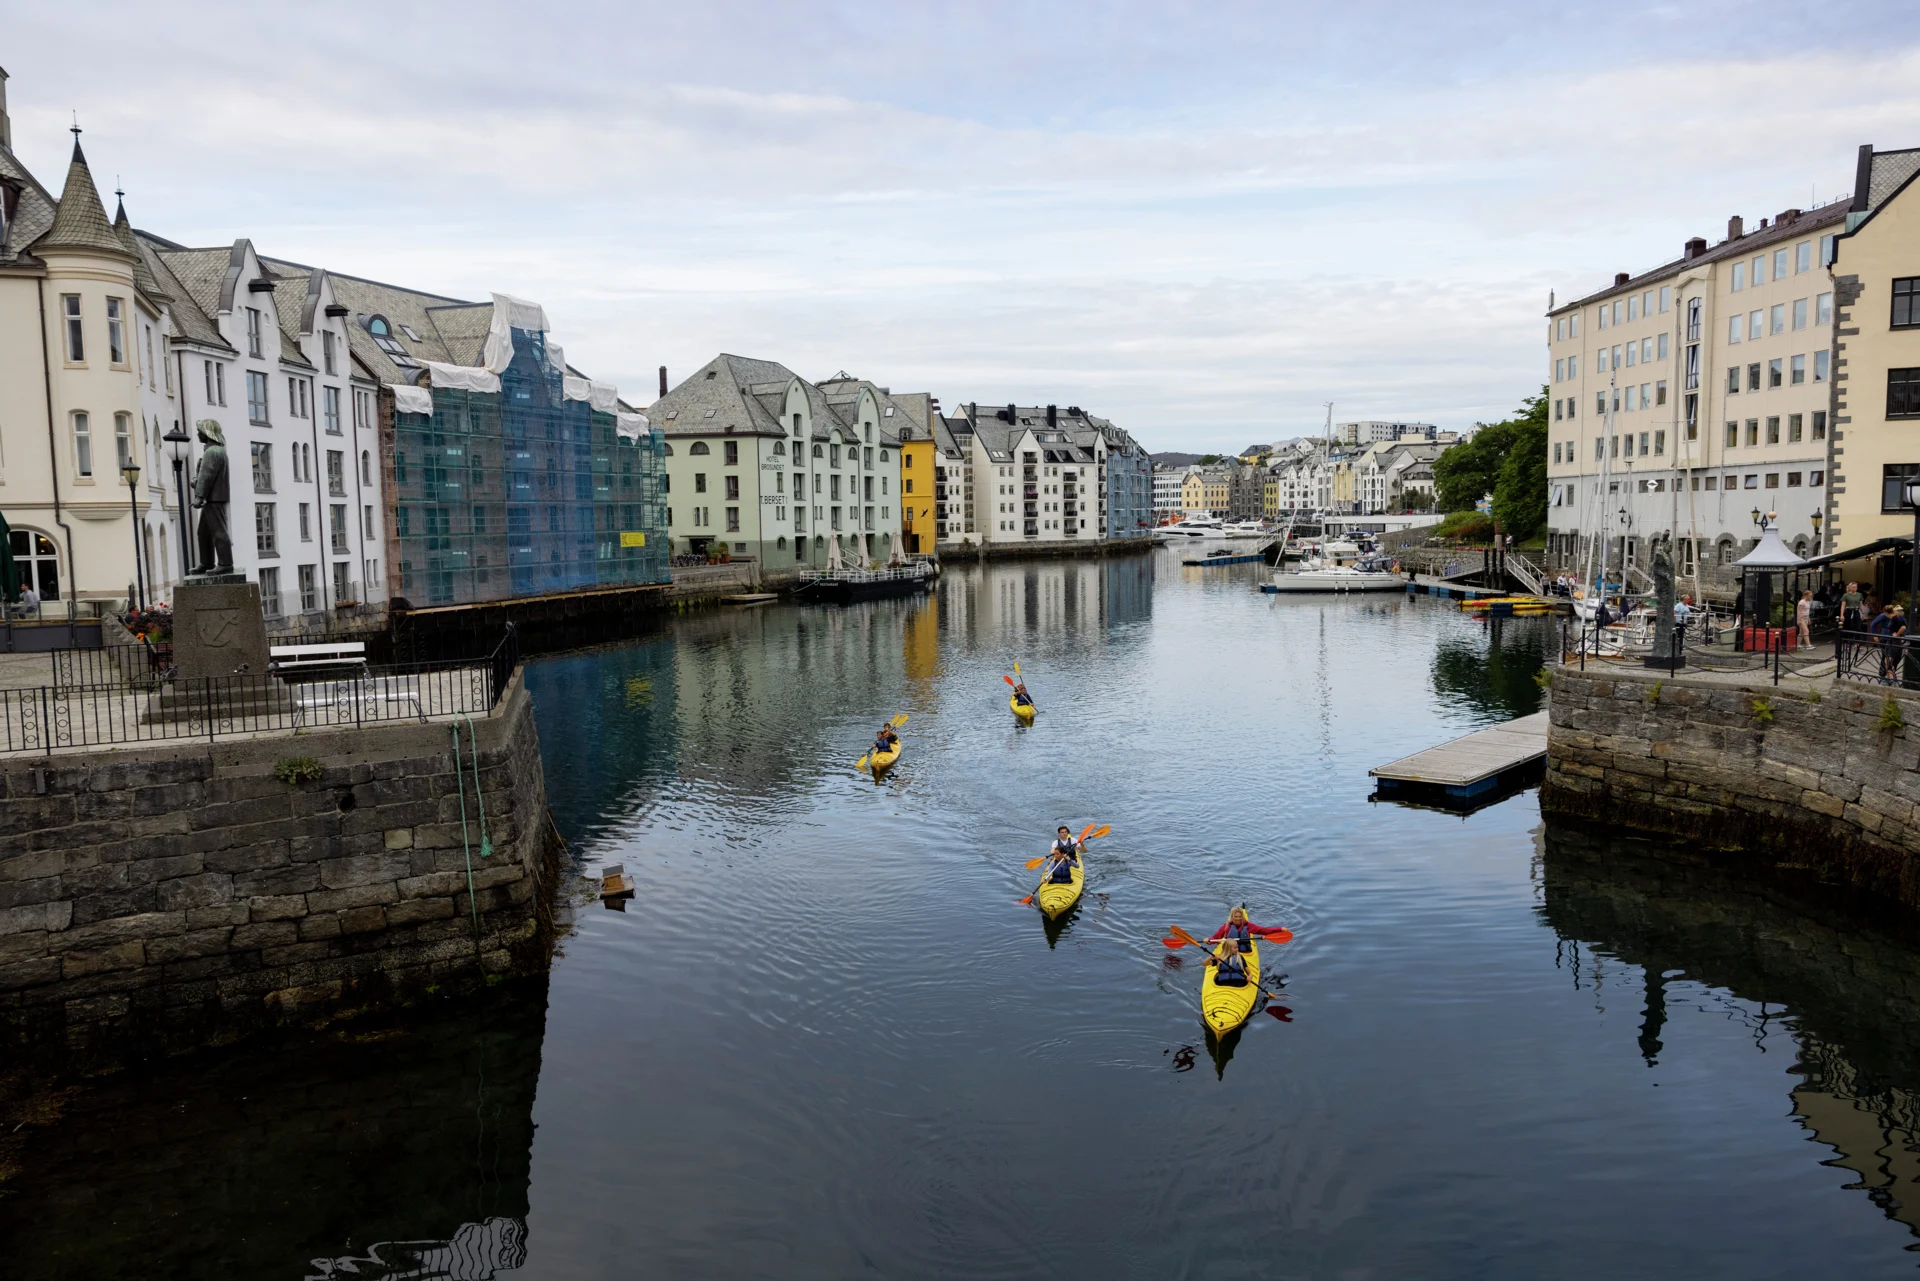 A group of kayakers exploring the canals in Alesund